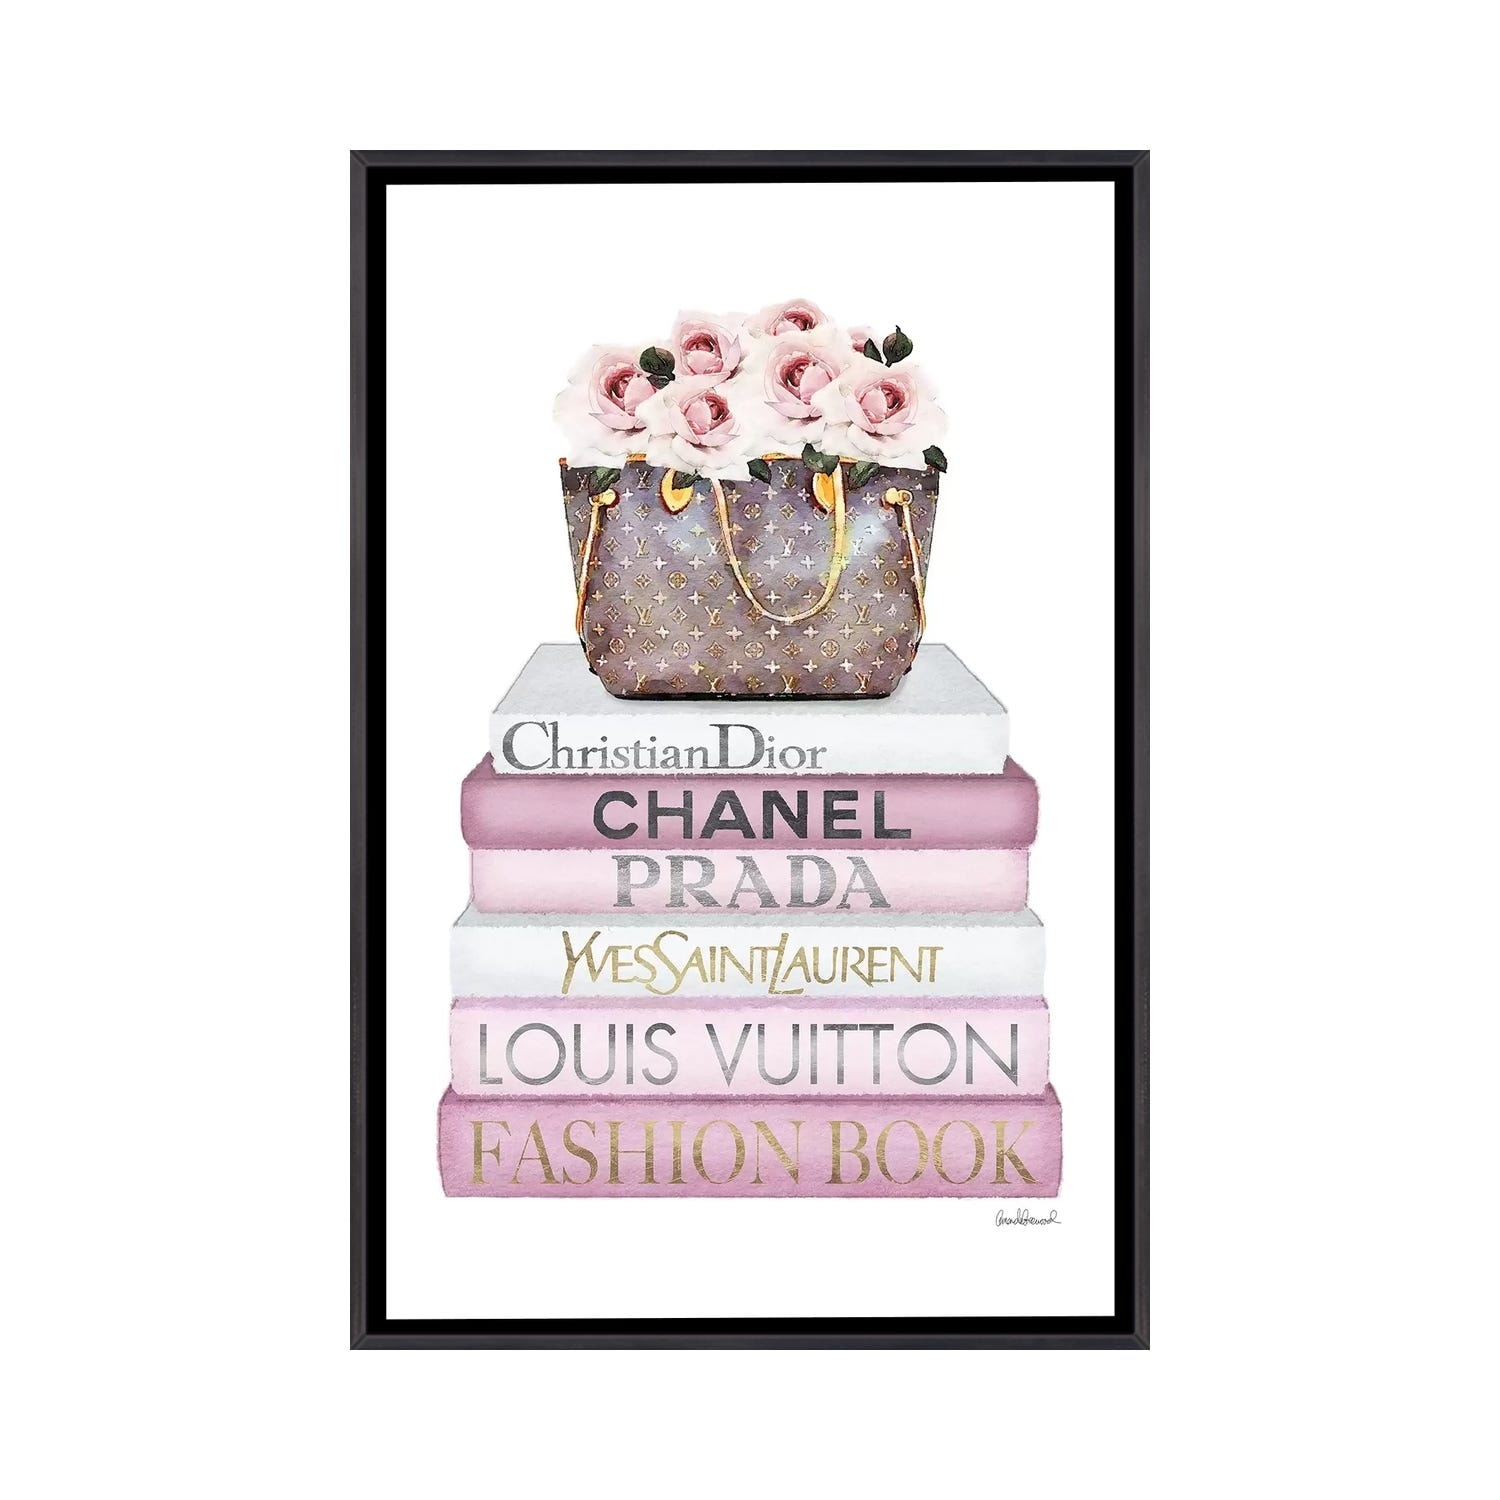 Pink Tone Books, Bag With Roses - Canvas Art Print